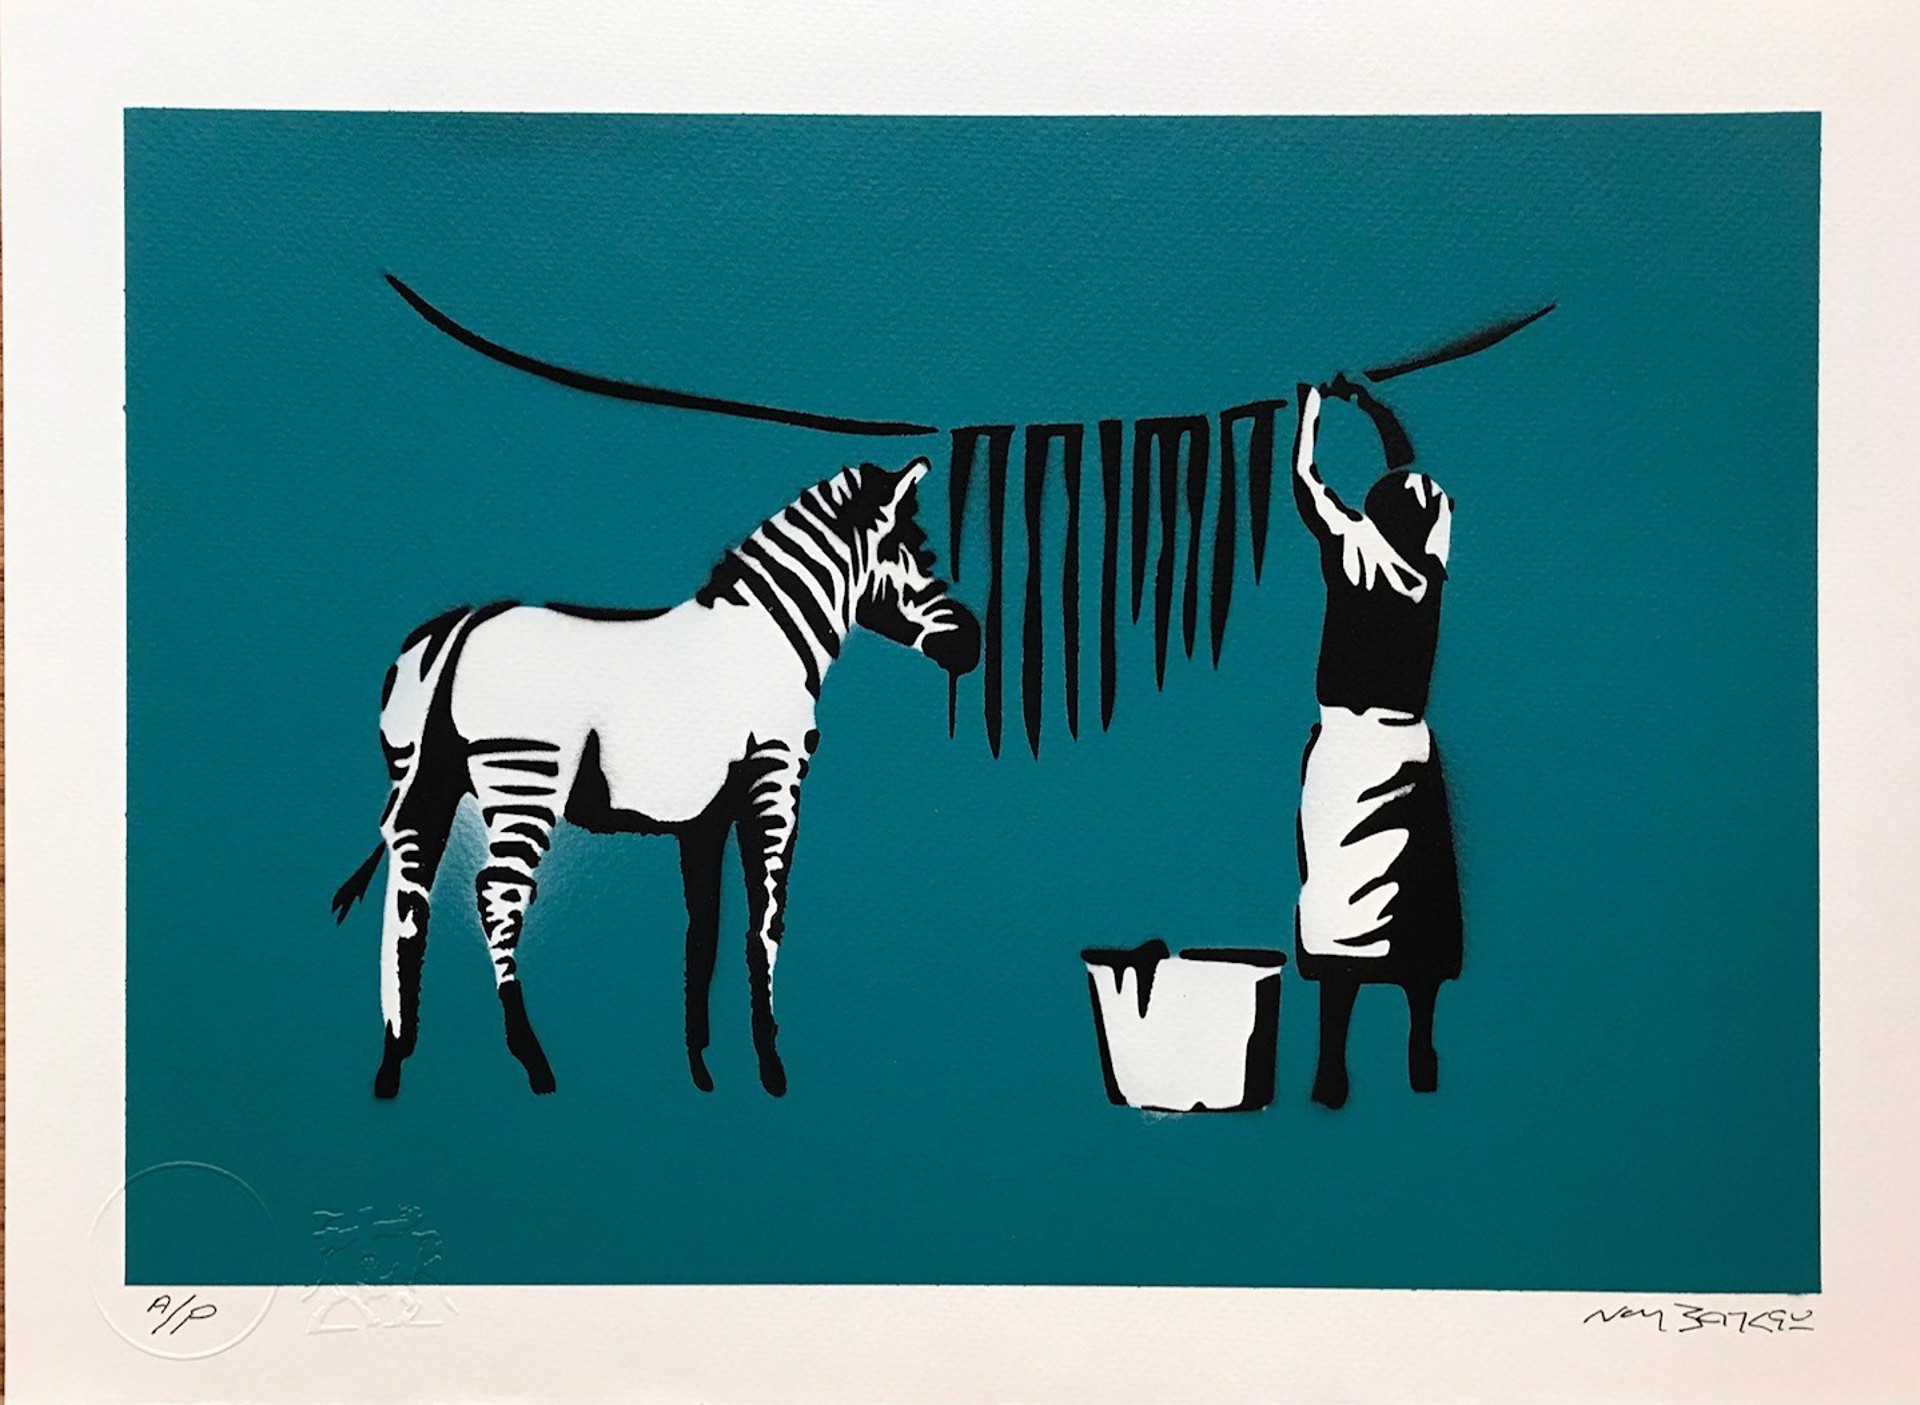 Zebra Wash - Turquoise by Not Banksy